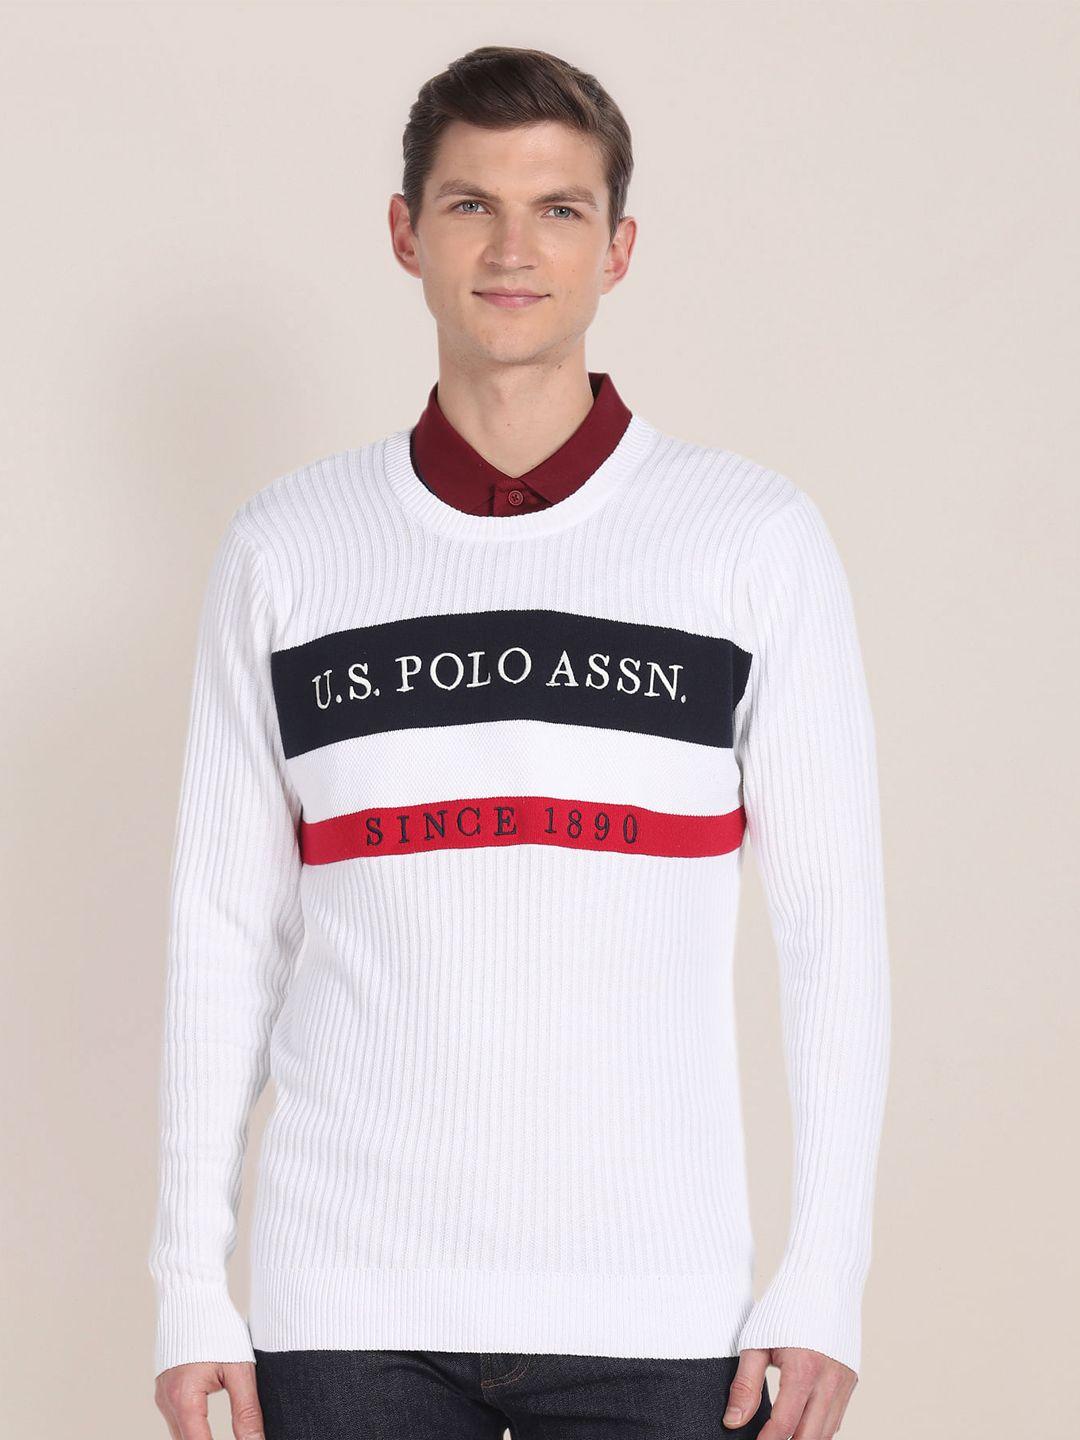 U.S. Polo Assn. Printed Pullover Sweater